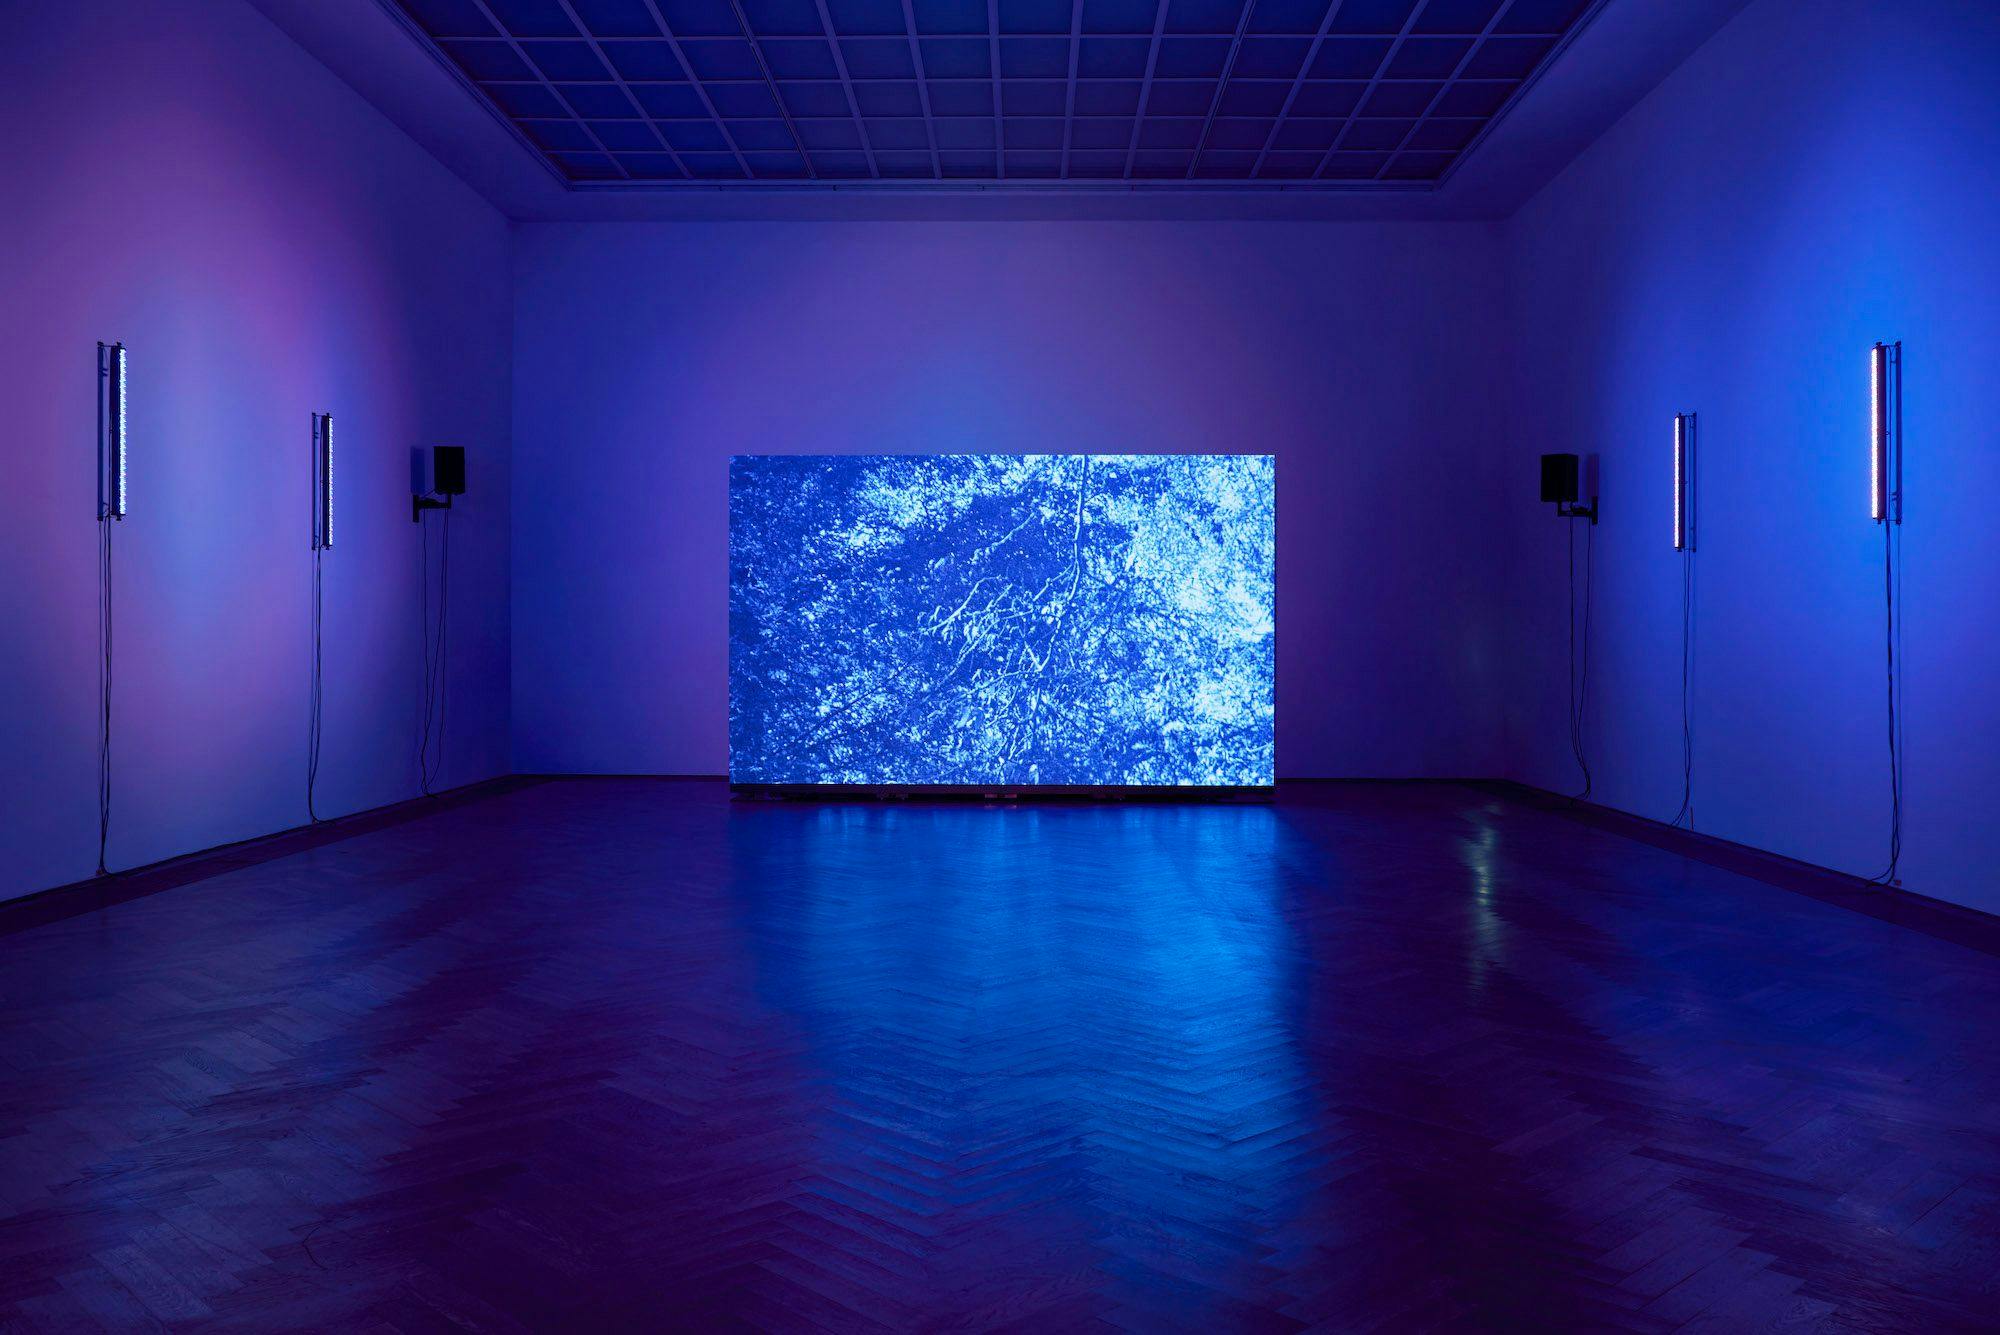 Gallery space with blue, purple glow. Two blue neon lights are fixed to walls on either side and a large blue glowing canvas is in the centre.